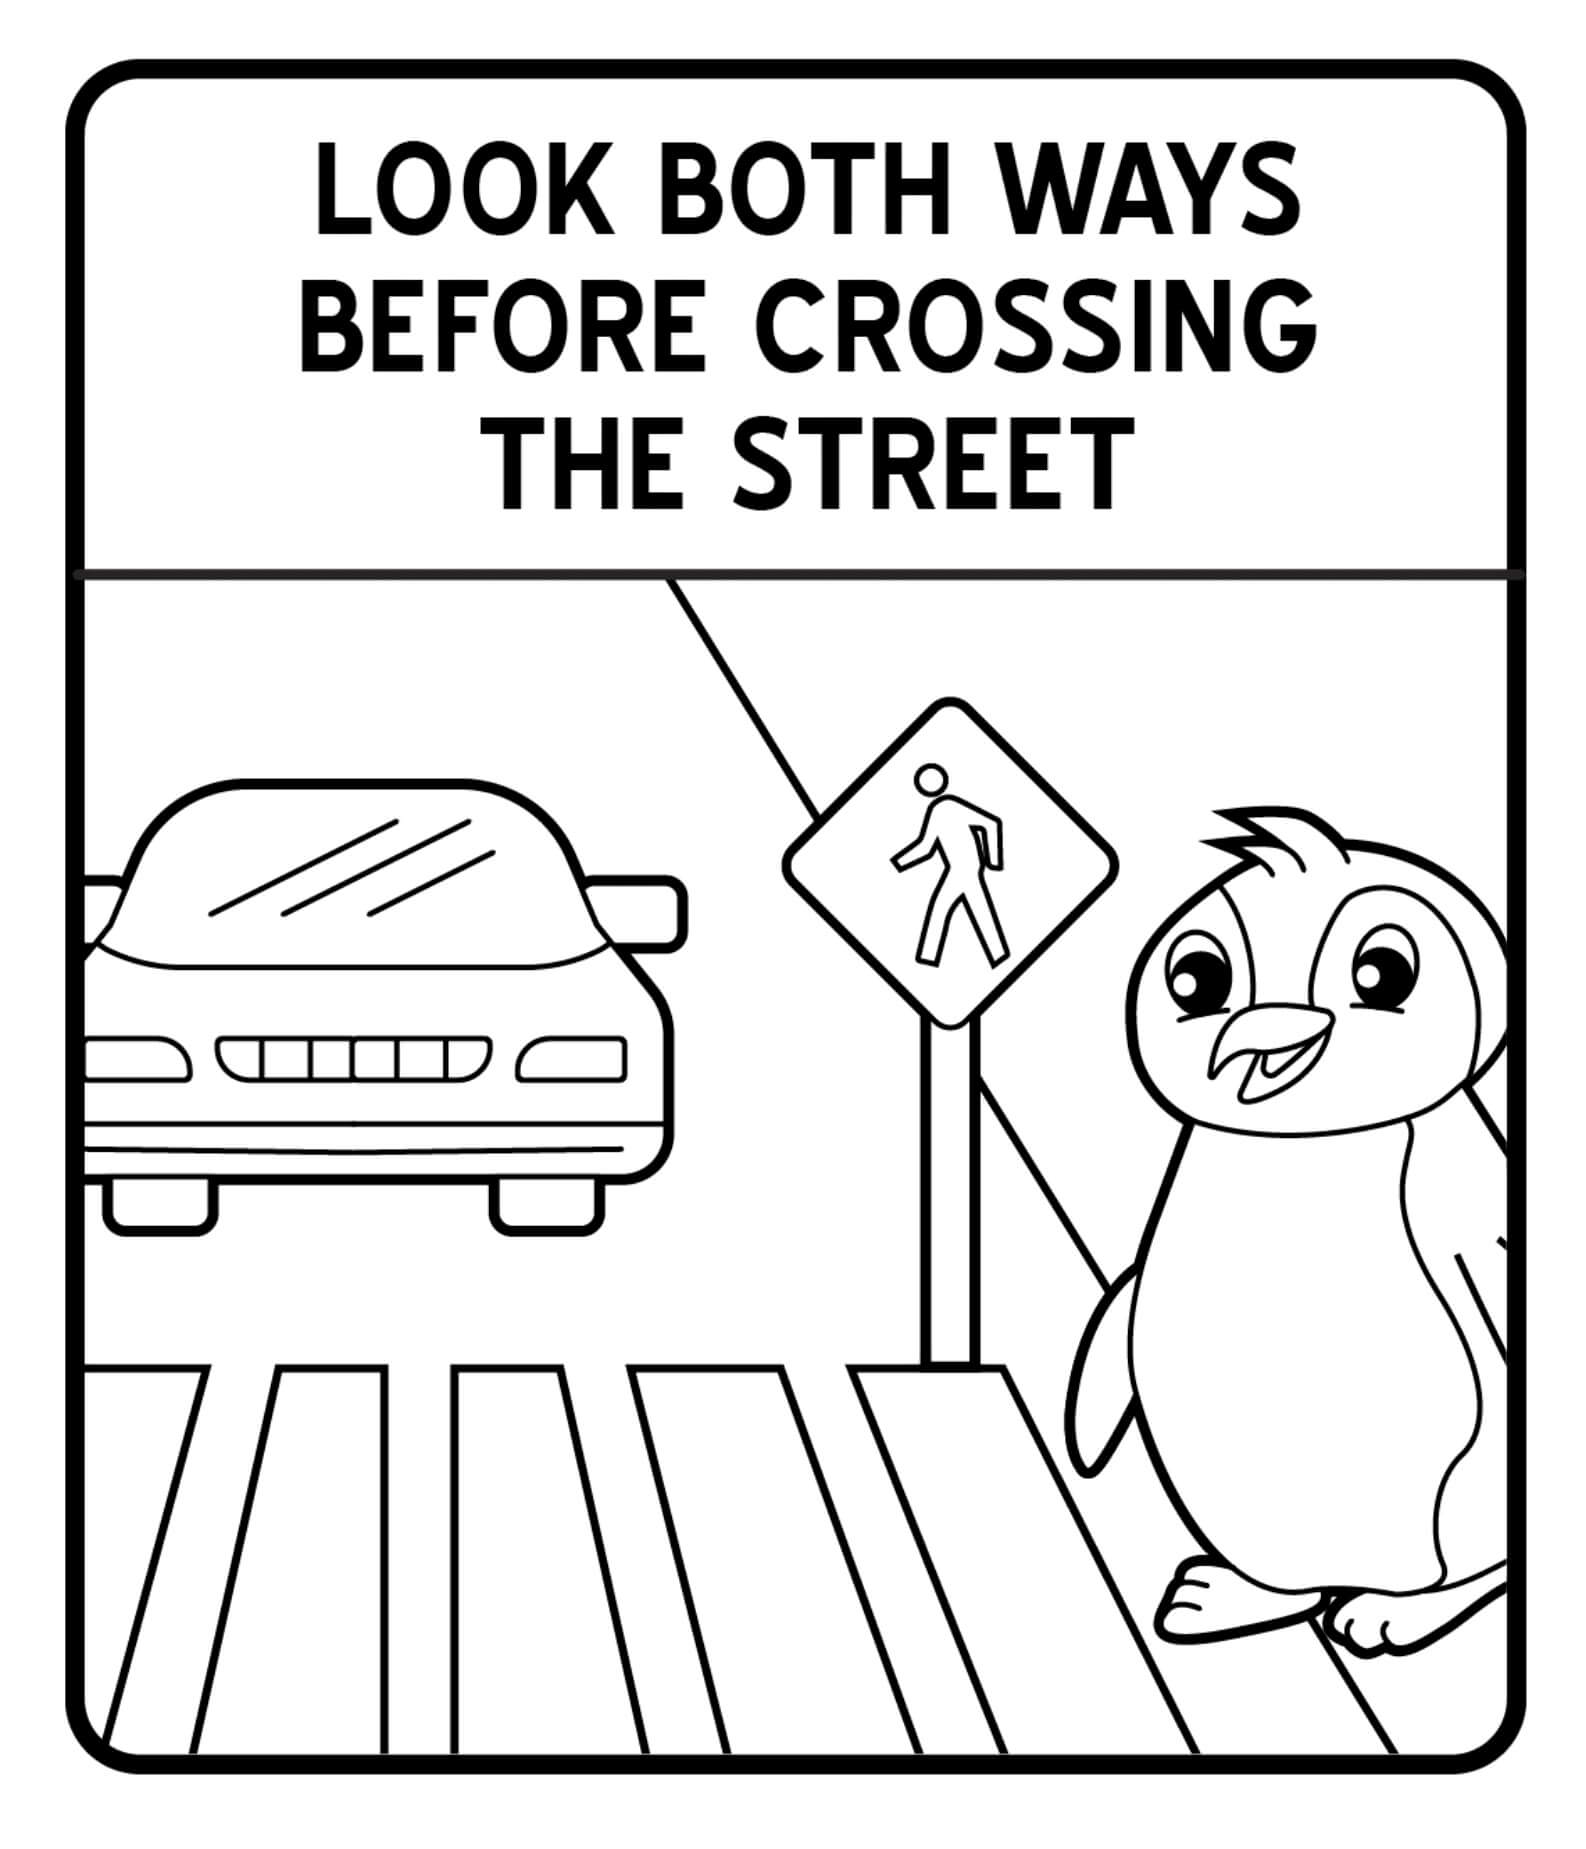 Penguins in Road and Street Safety